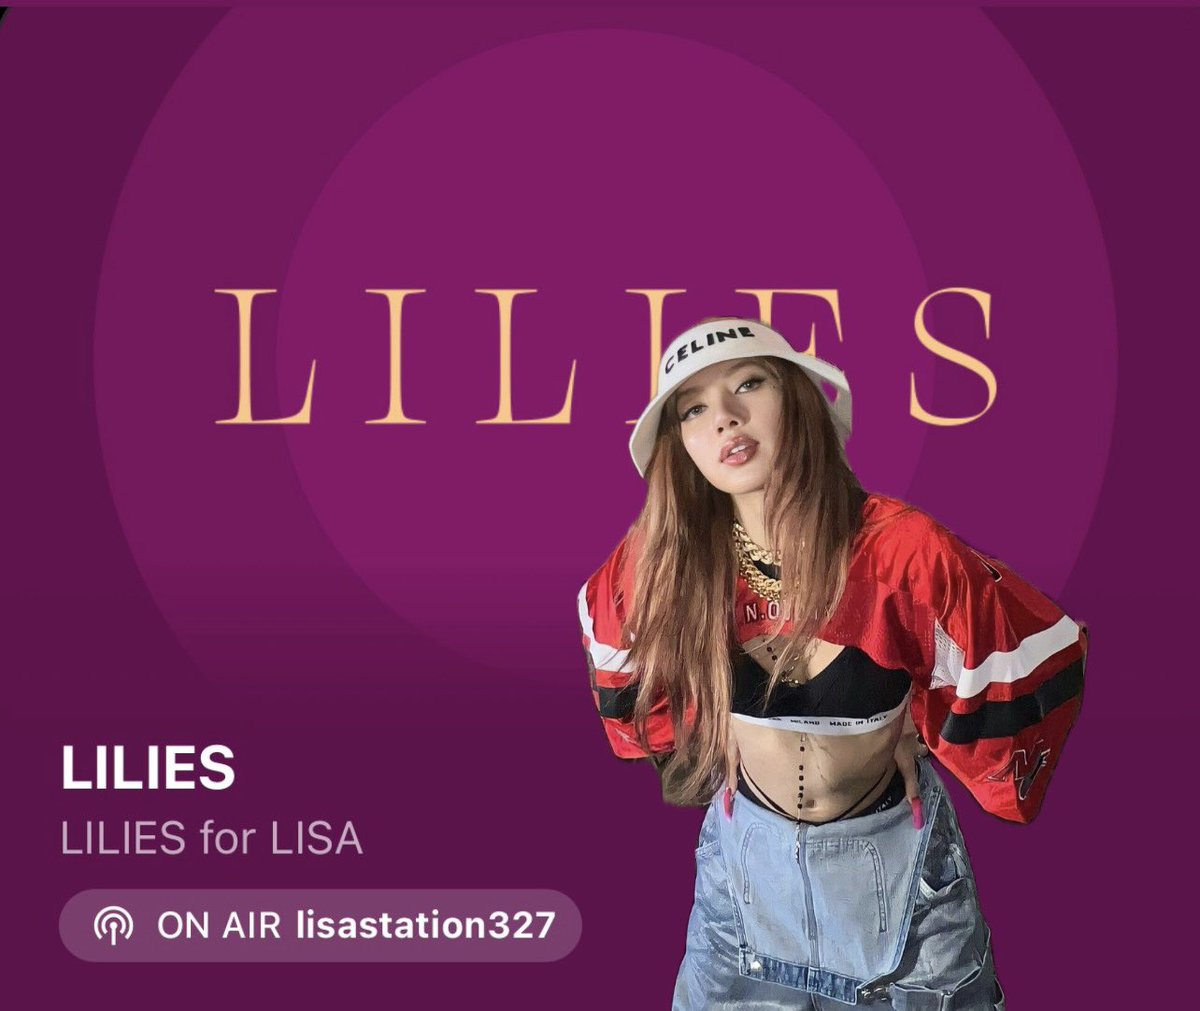 Join Stationhead @lisastation327 from the link below with your Spotify premium to stream Lisa songs while you are sleeping! 🔗stationhead.com/c/lilies #LISA #LALISA #MONEY